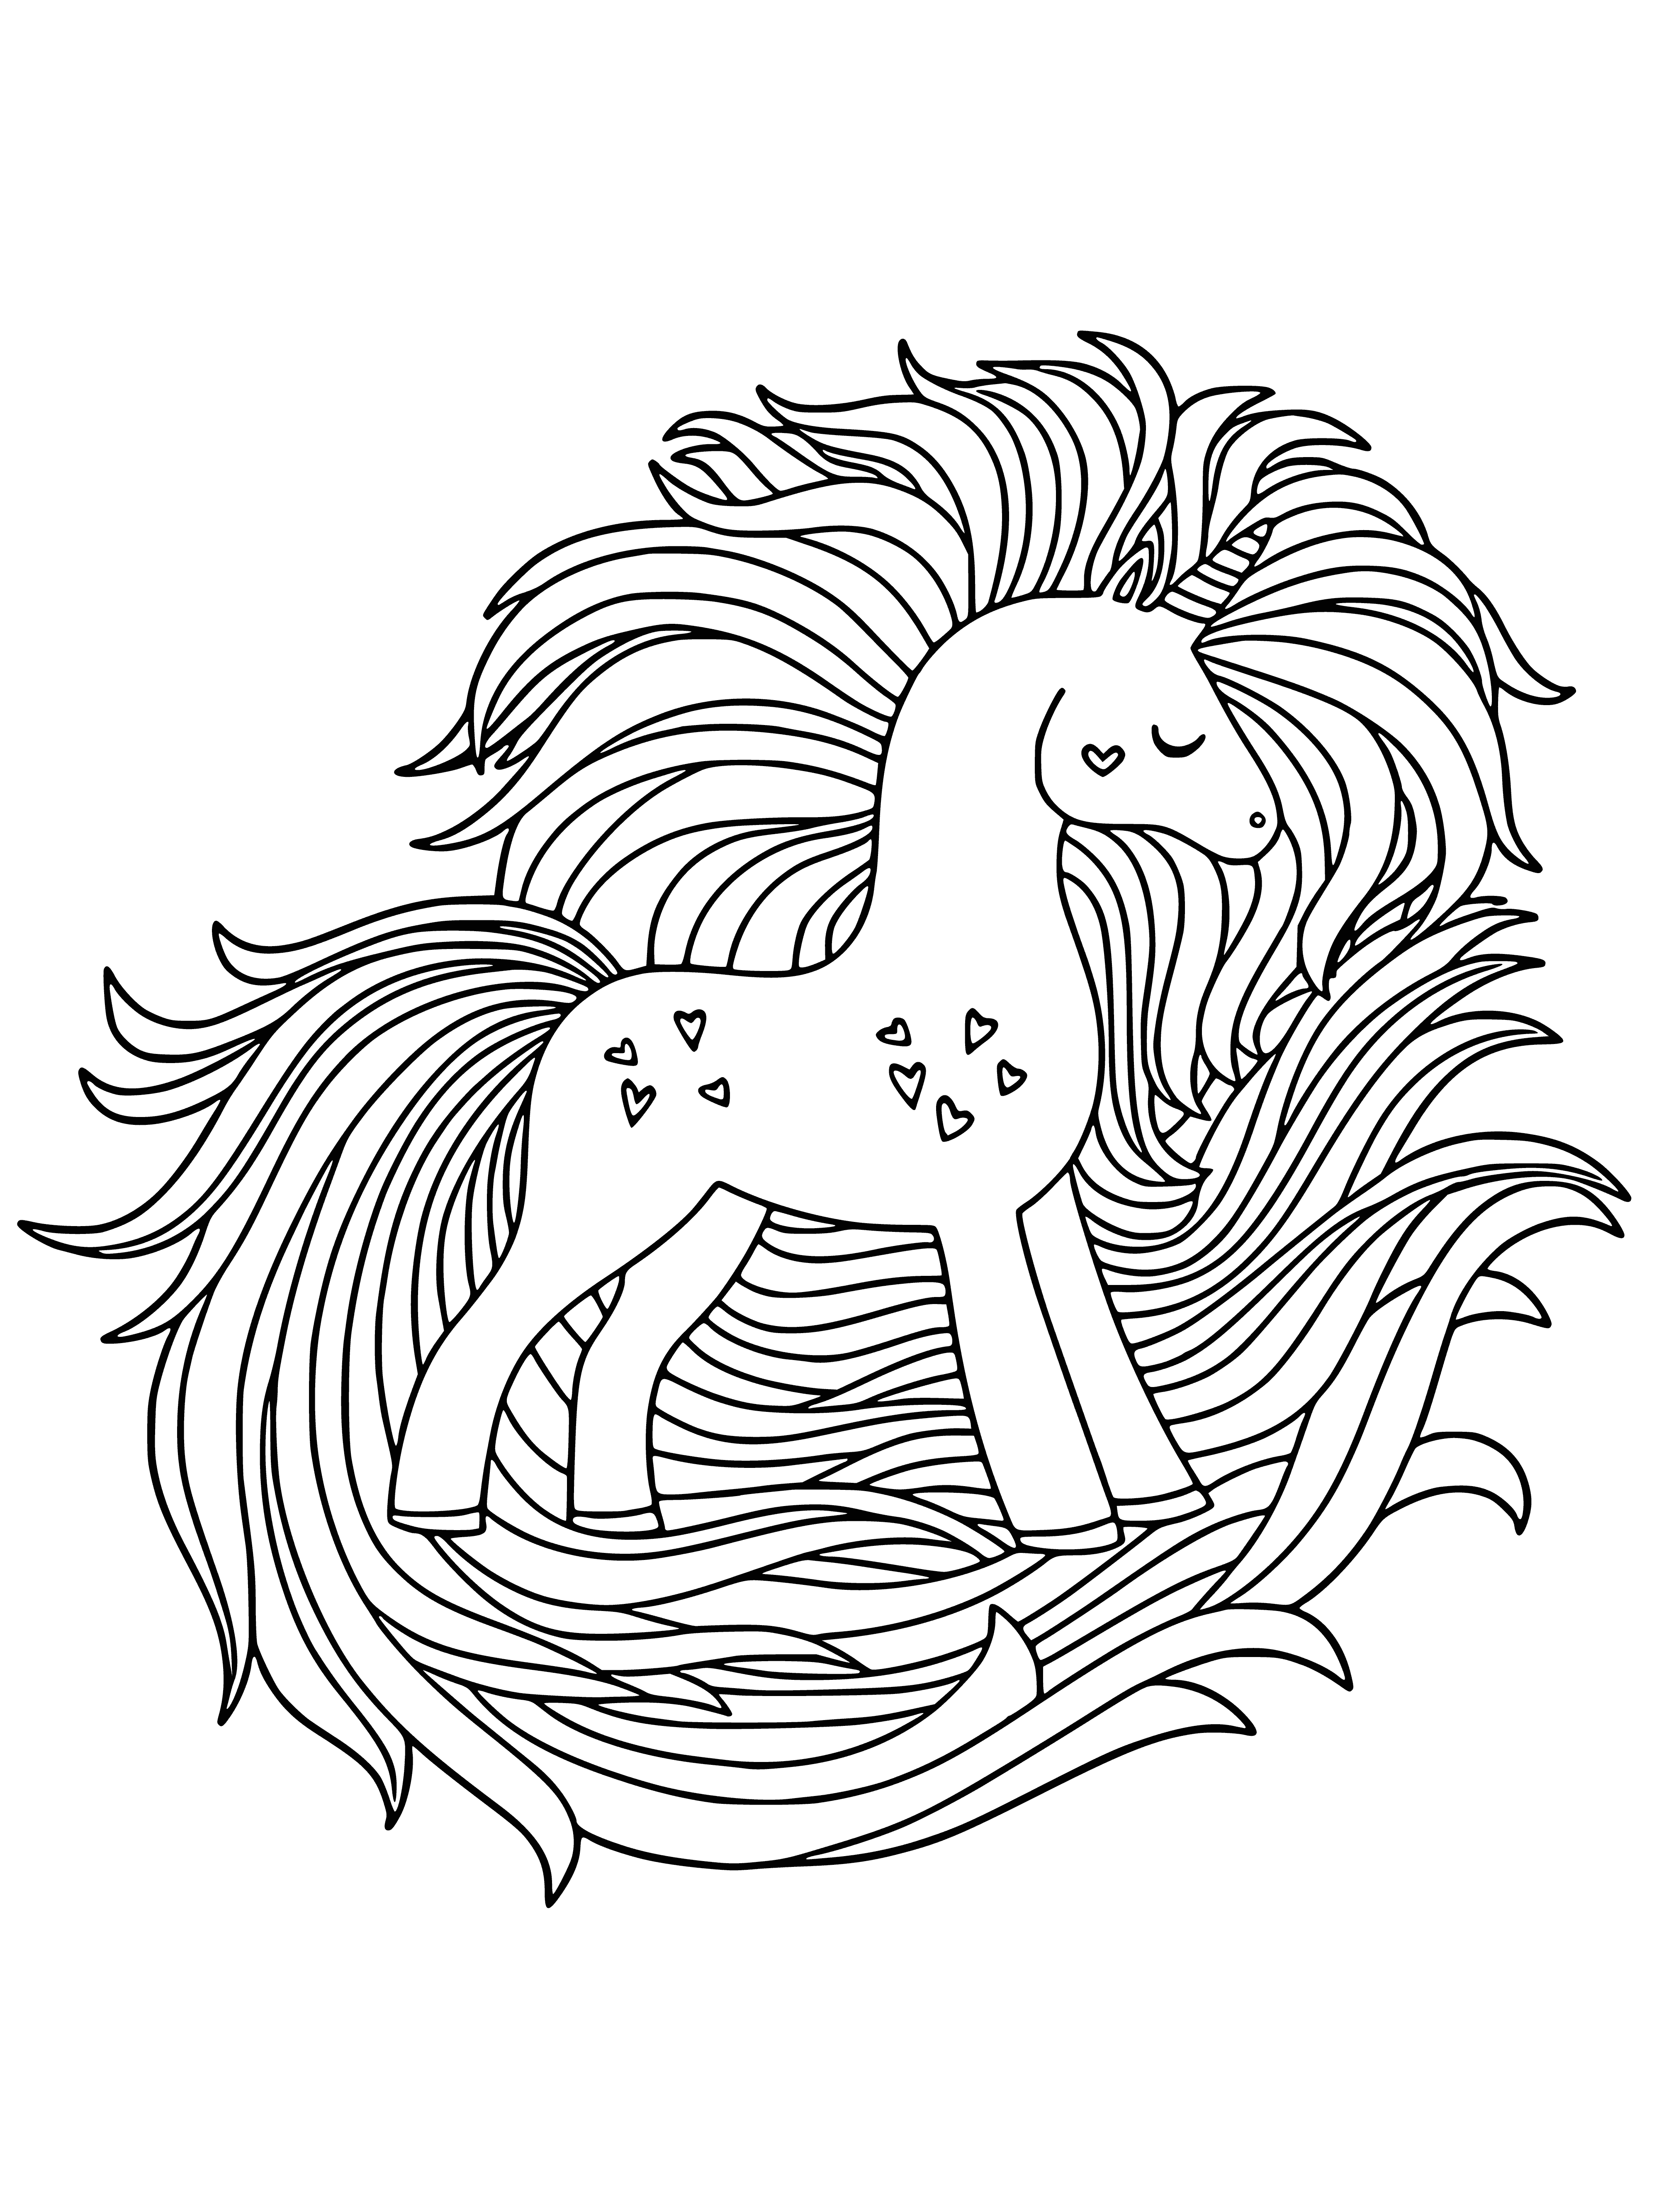 coloring page: A peaceful unicorn with shimmering white coat, multicolored mane and tail, and small horn is surrounded by flowers and leaves. #coloringpages #unicorn #antistress